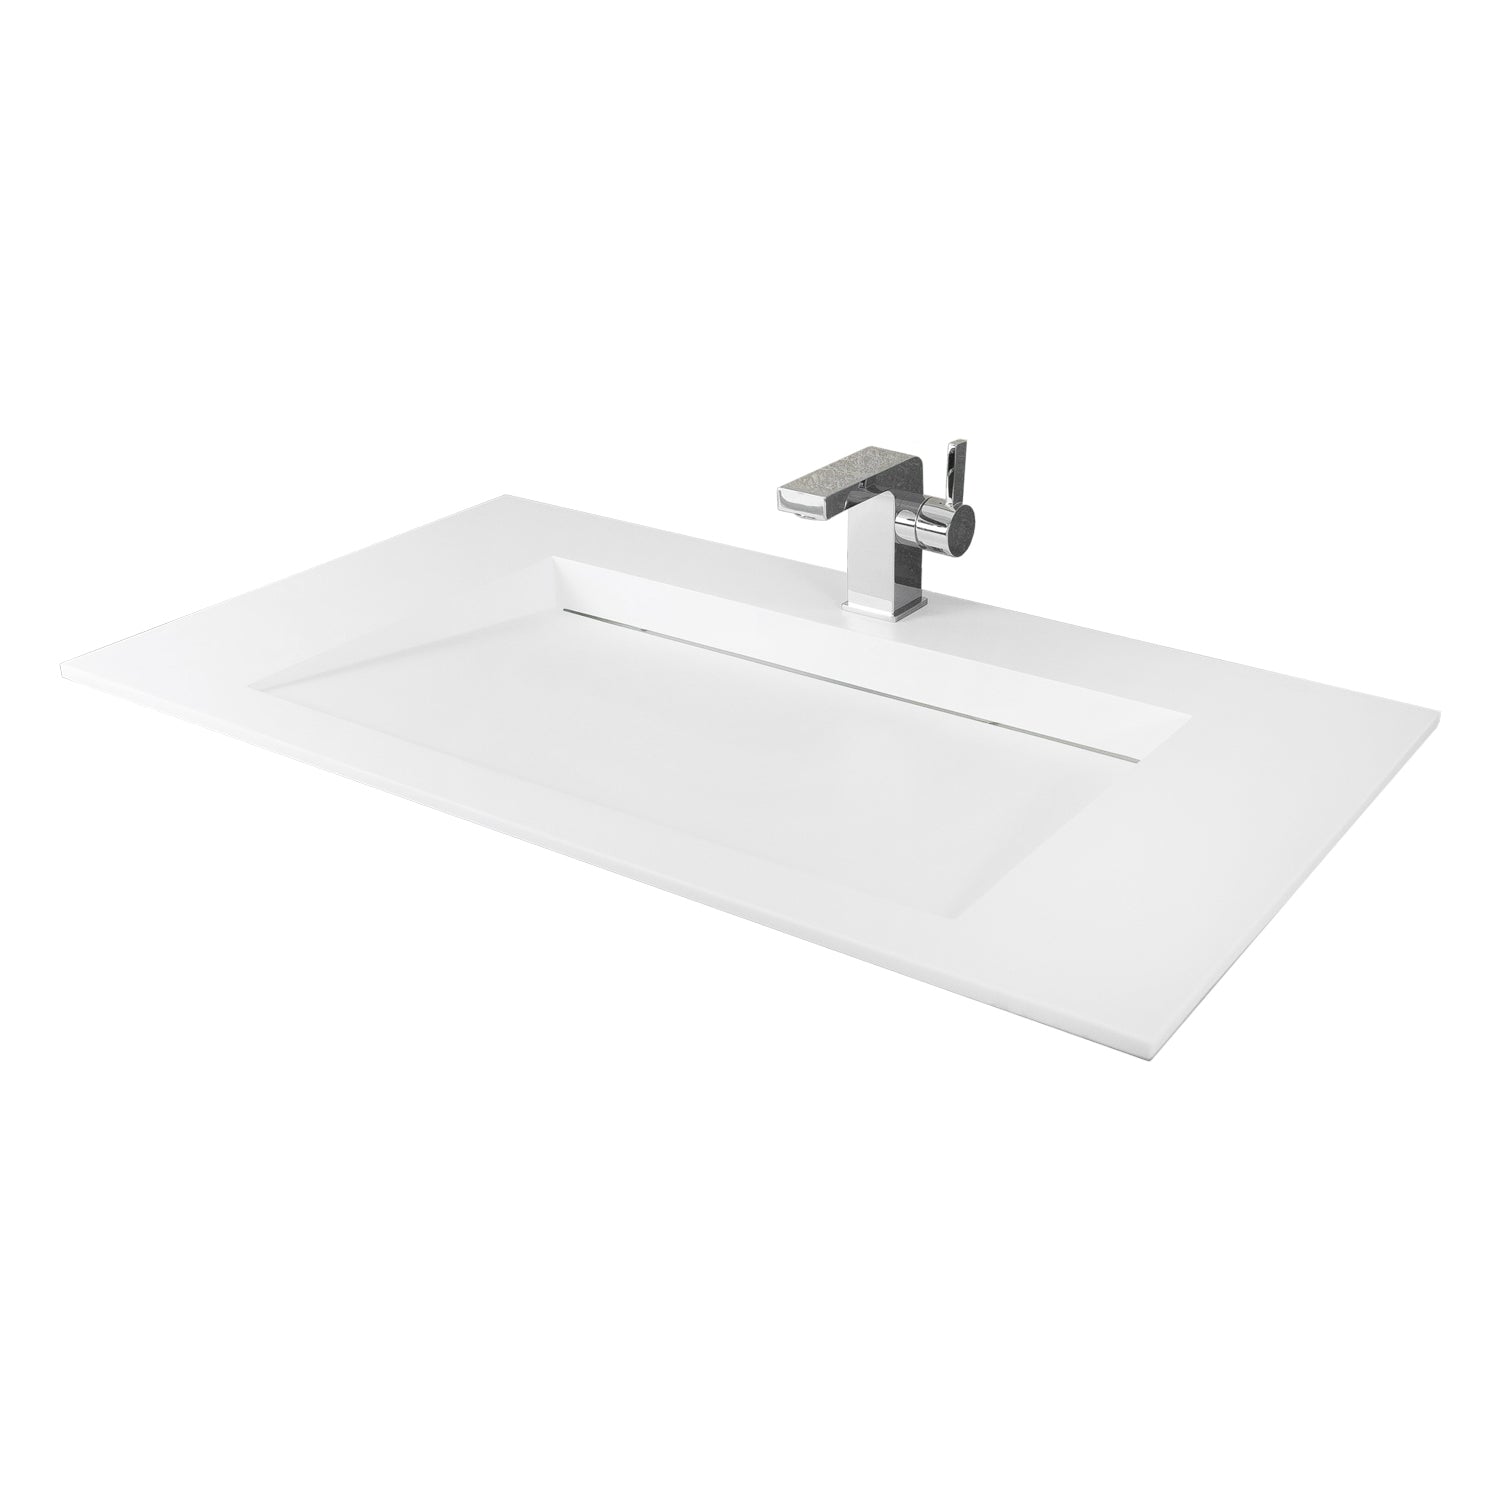 DAX Solid Surface Rectangle Single Bowl Top Mount Bathroom Sink, White Matte Finish,  35-1/4 x 19-5/8 x 3-1/2 Inches (DAX-AB-1331)